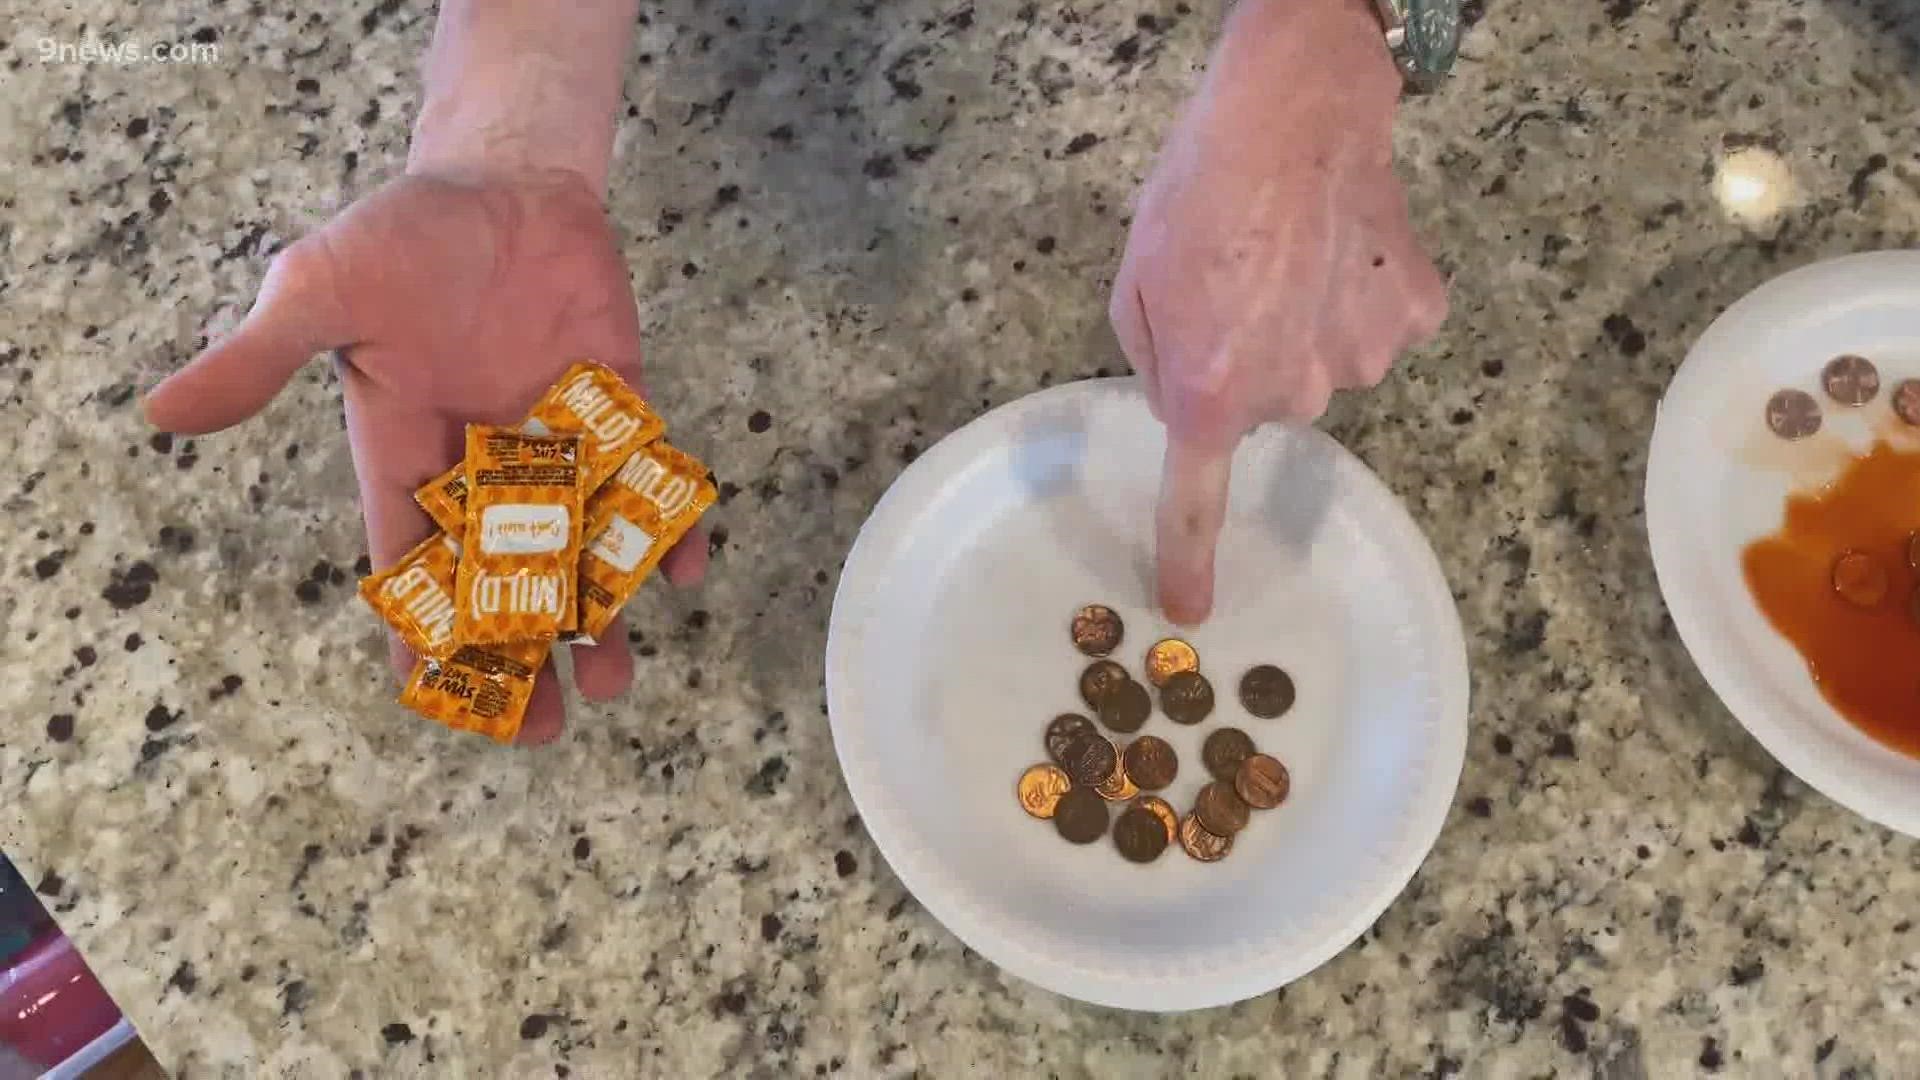 There are lots of household hacks for removing stains and cleaning things, but have you ever heard of using taco sauce to clean pennies?